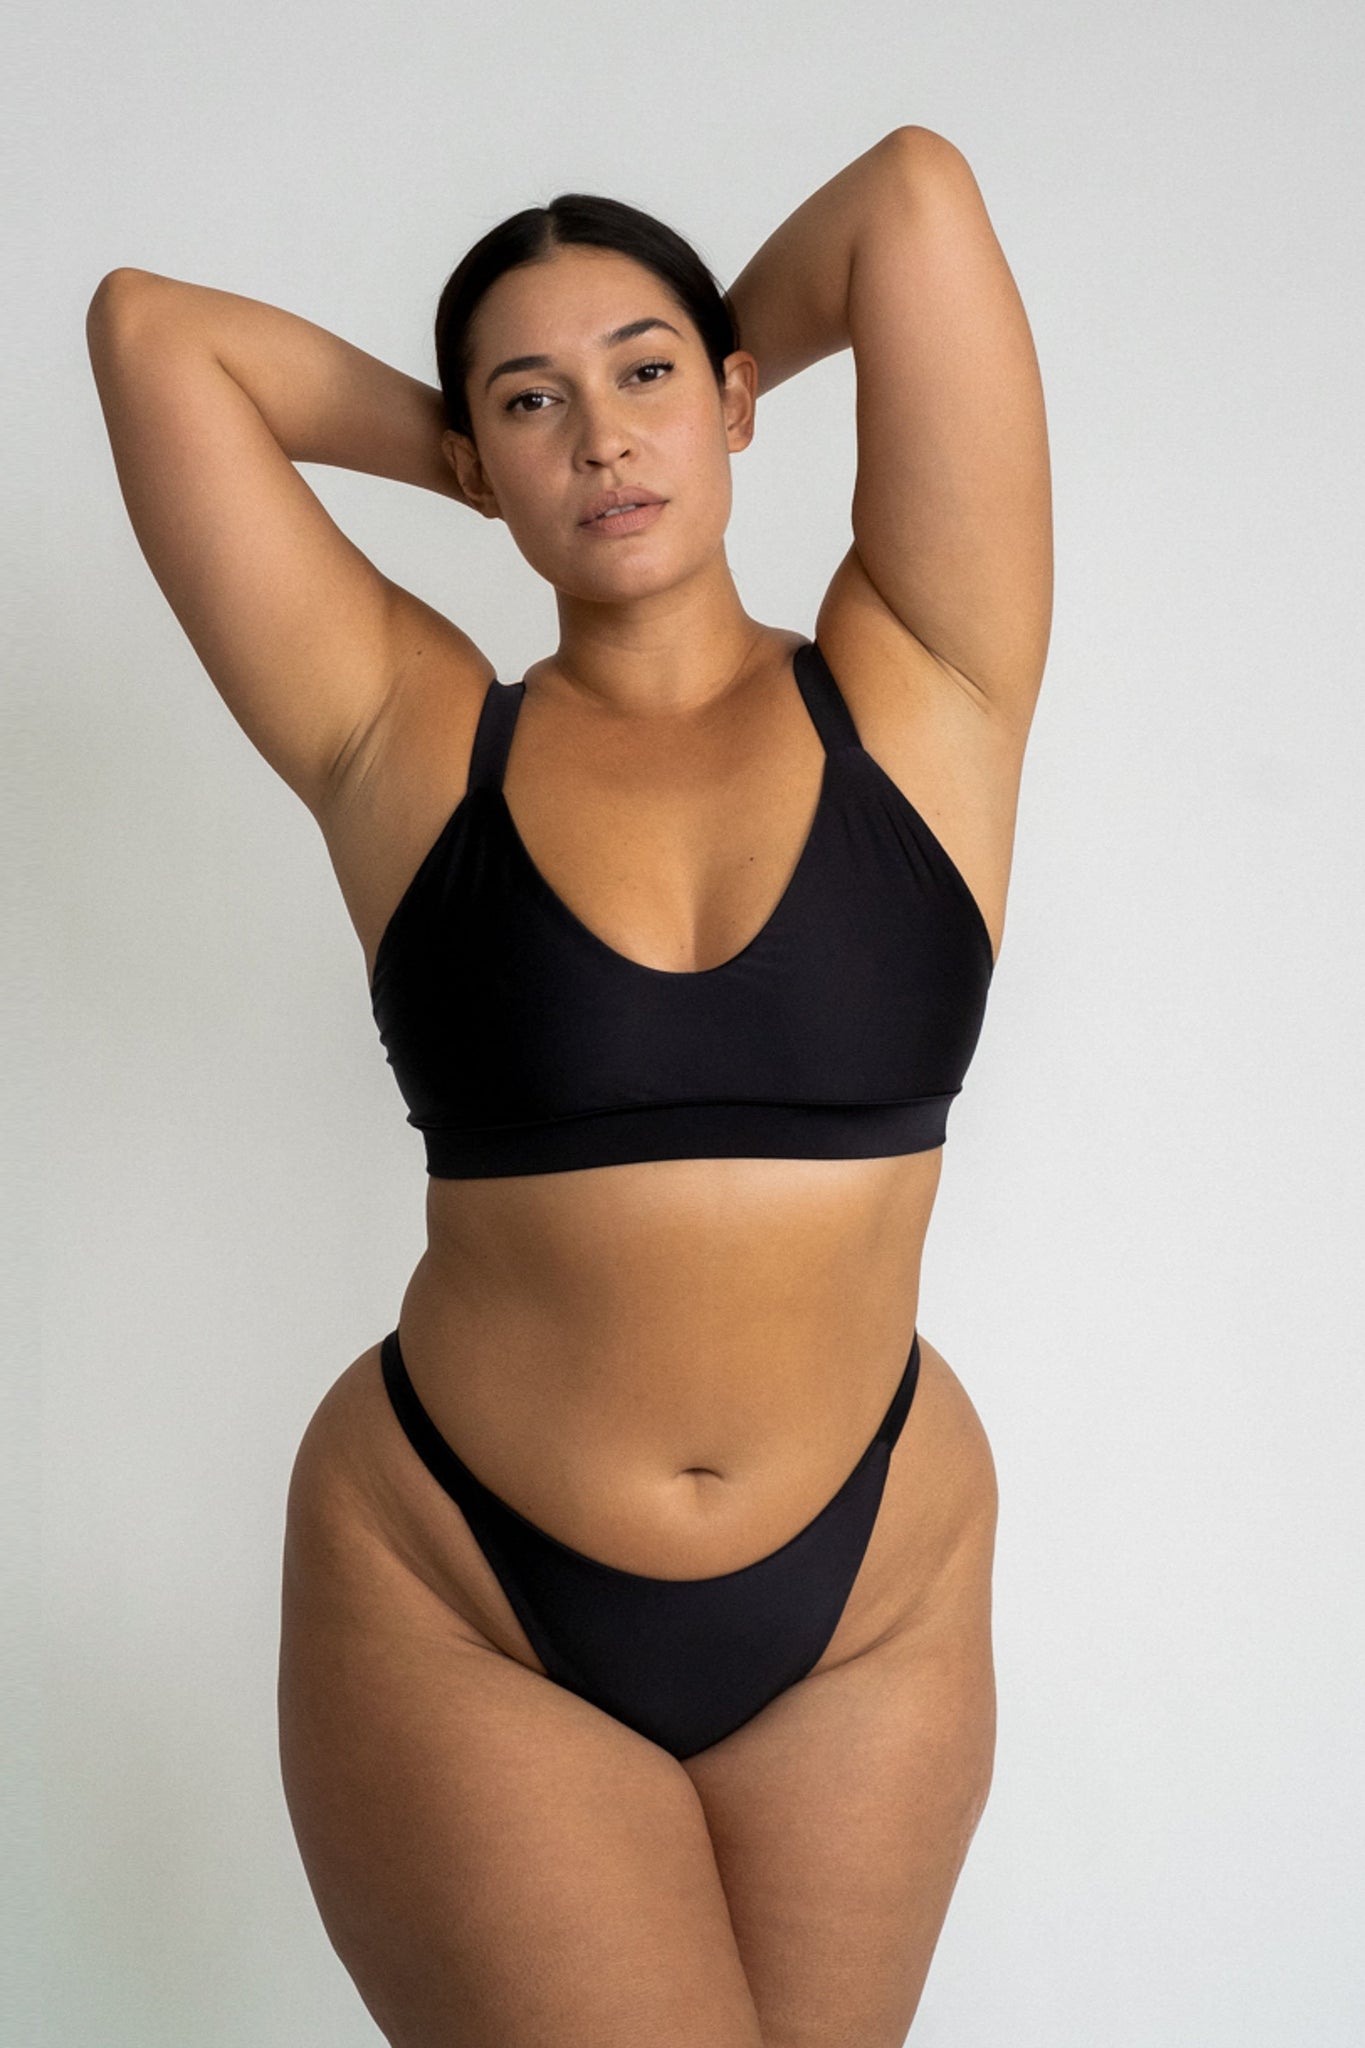 A woman standing with her arms folded above her head wearing high cut cheeky black bikini bottoms and a matching black bikini top with a a scoop neckline.